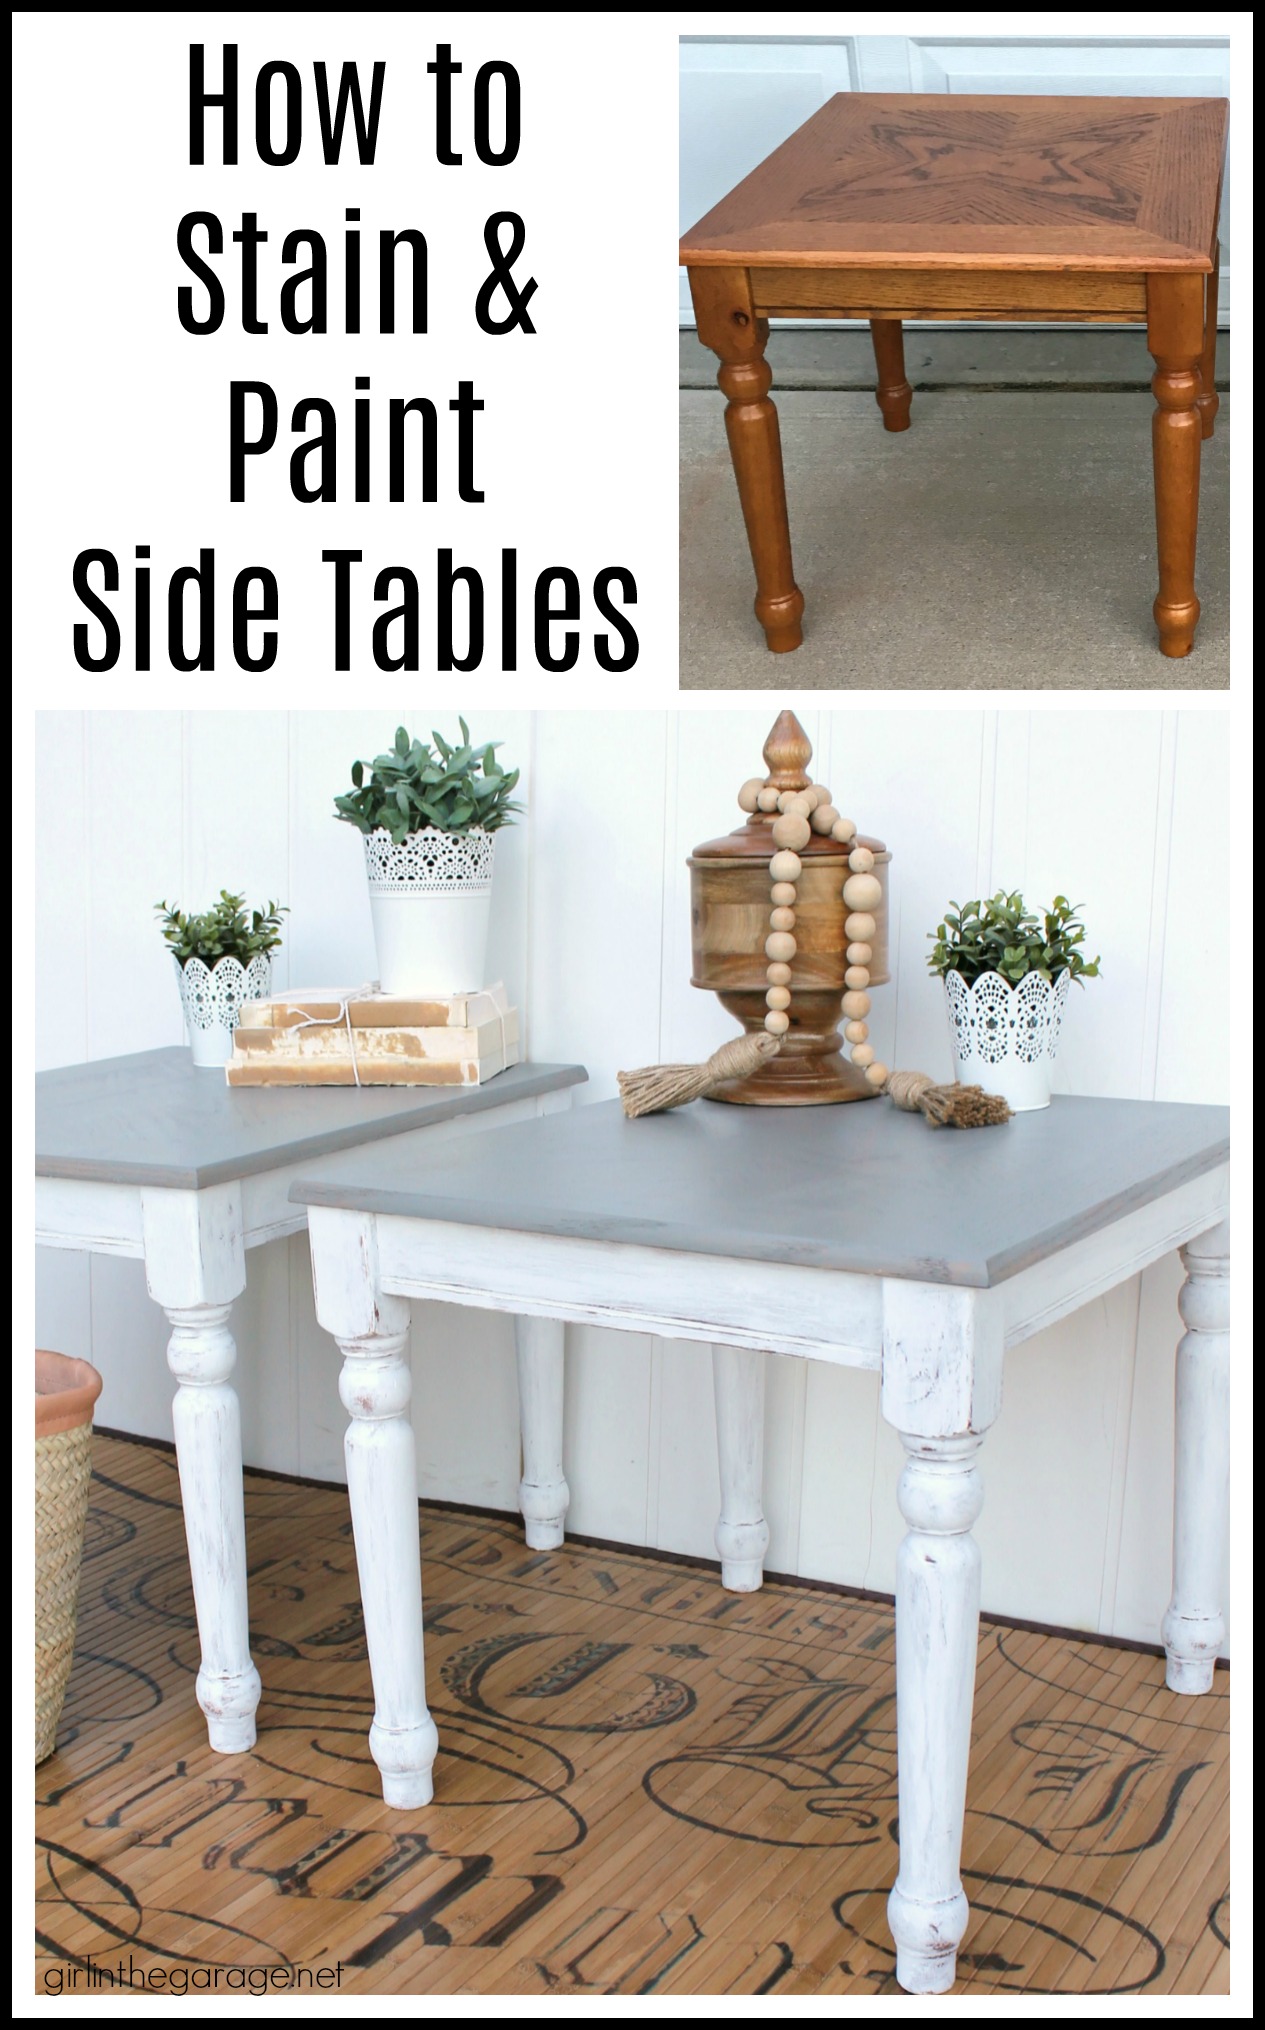 Create a charming modern farmhouse finish with Minwax Wood Finish Semi-Transparent Color Stain on these stained and painted side tables. DIY makeover ideas by Girl in the Garage